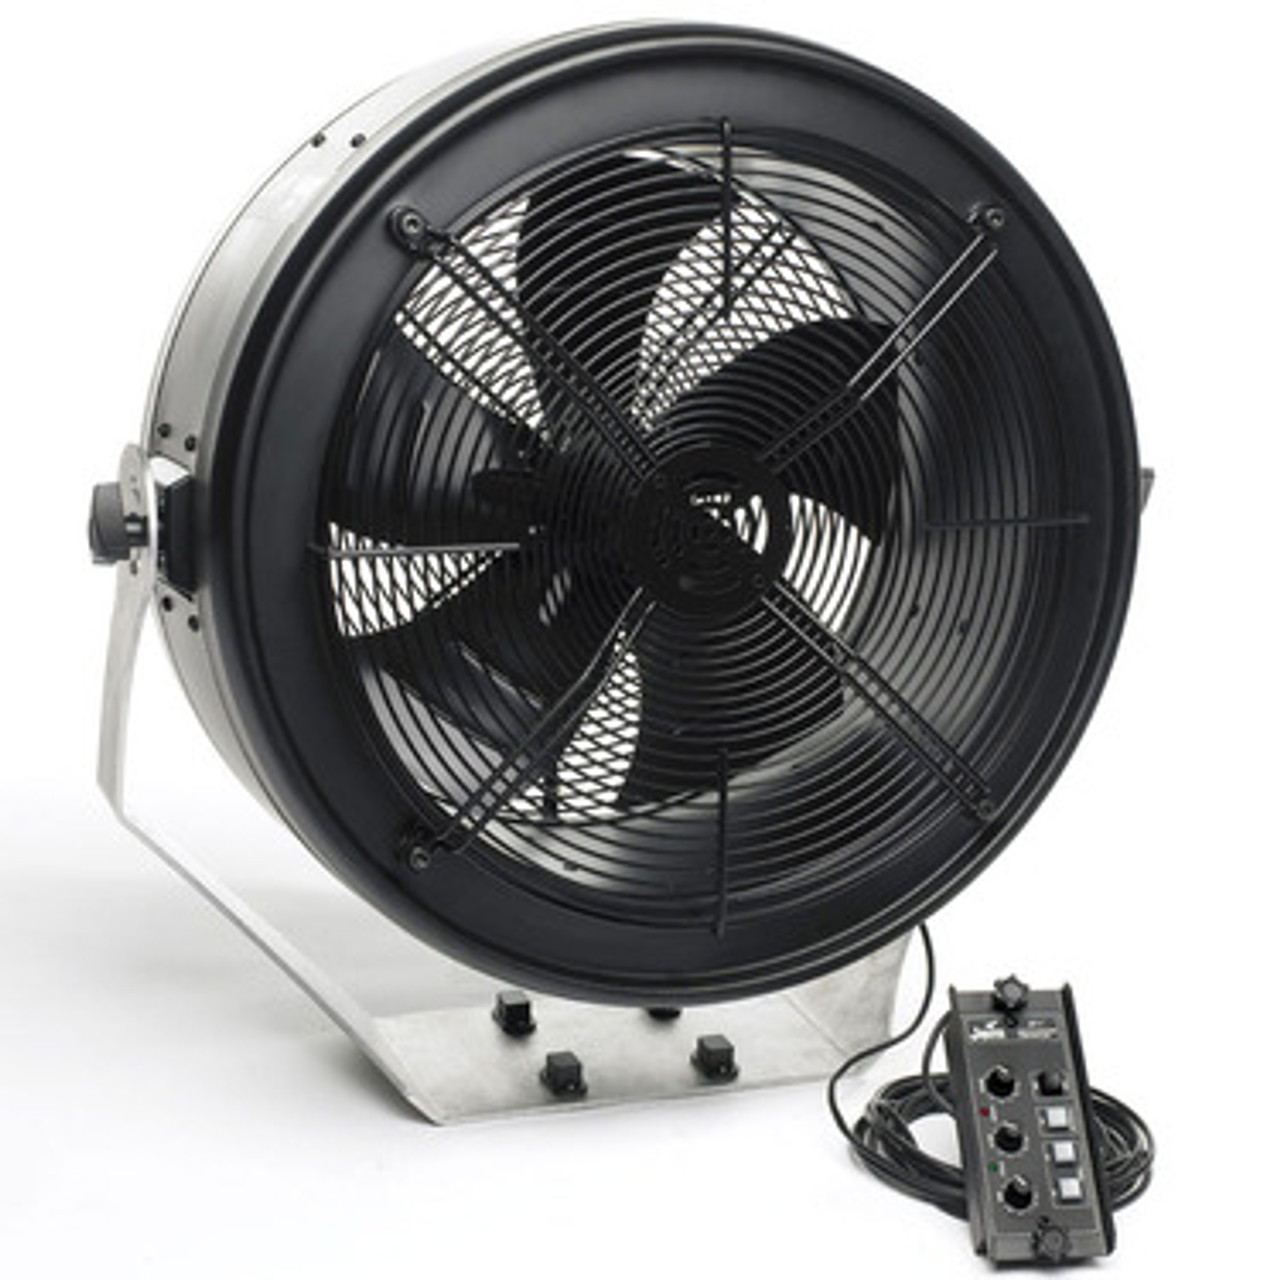 Martin Lighting JEM AF-2 24" Effect Fan with Variable Speed and Remote Control (92615400)